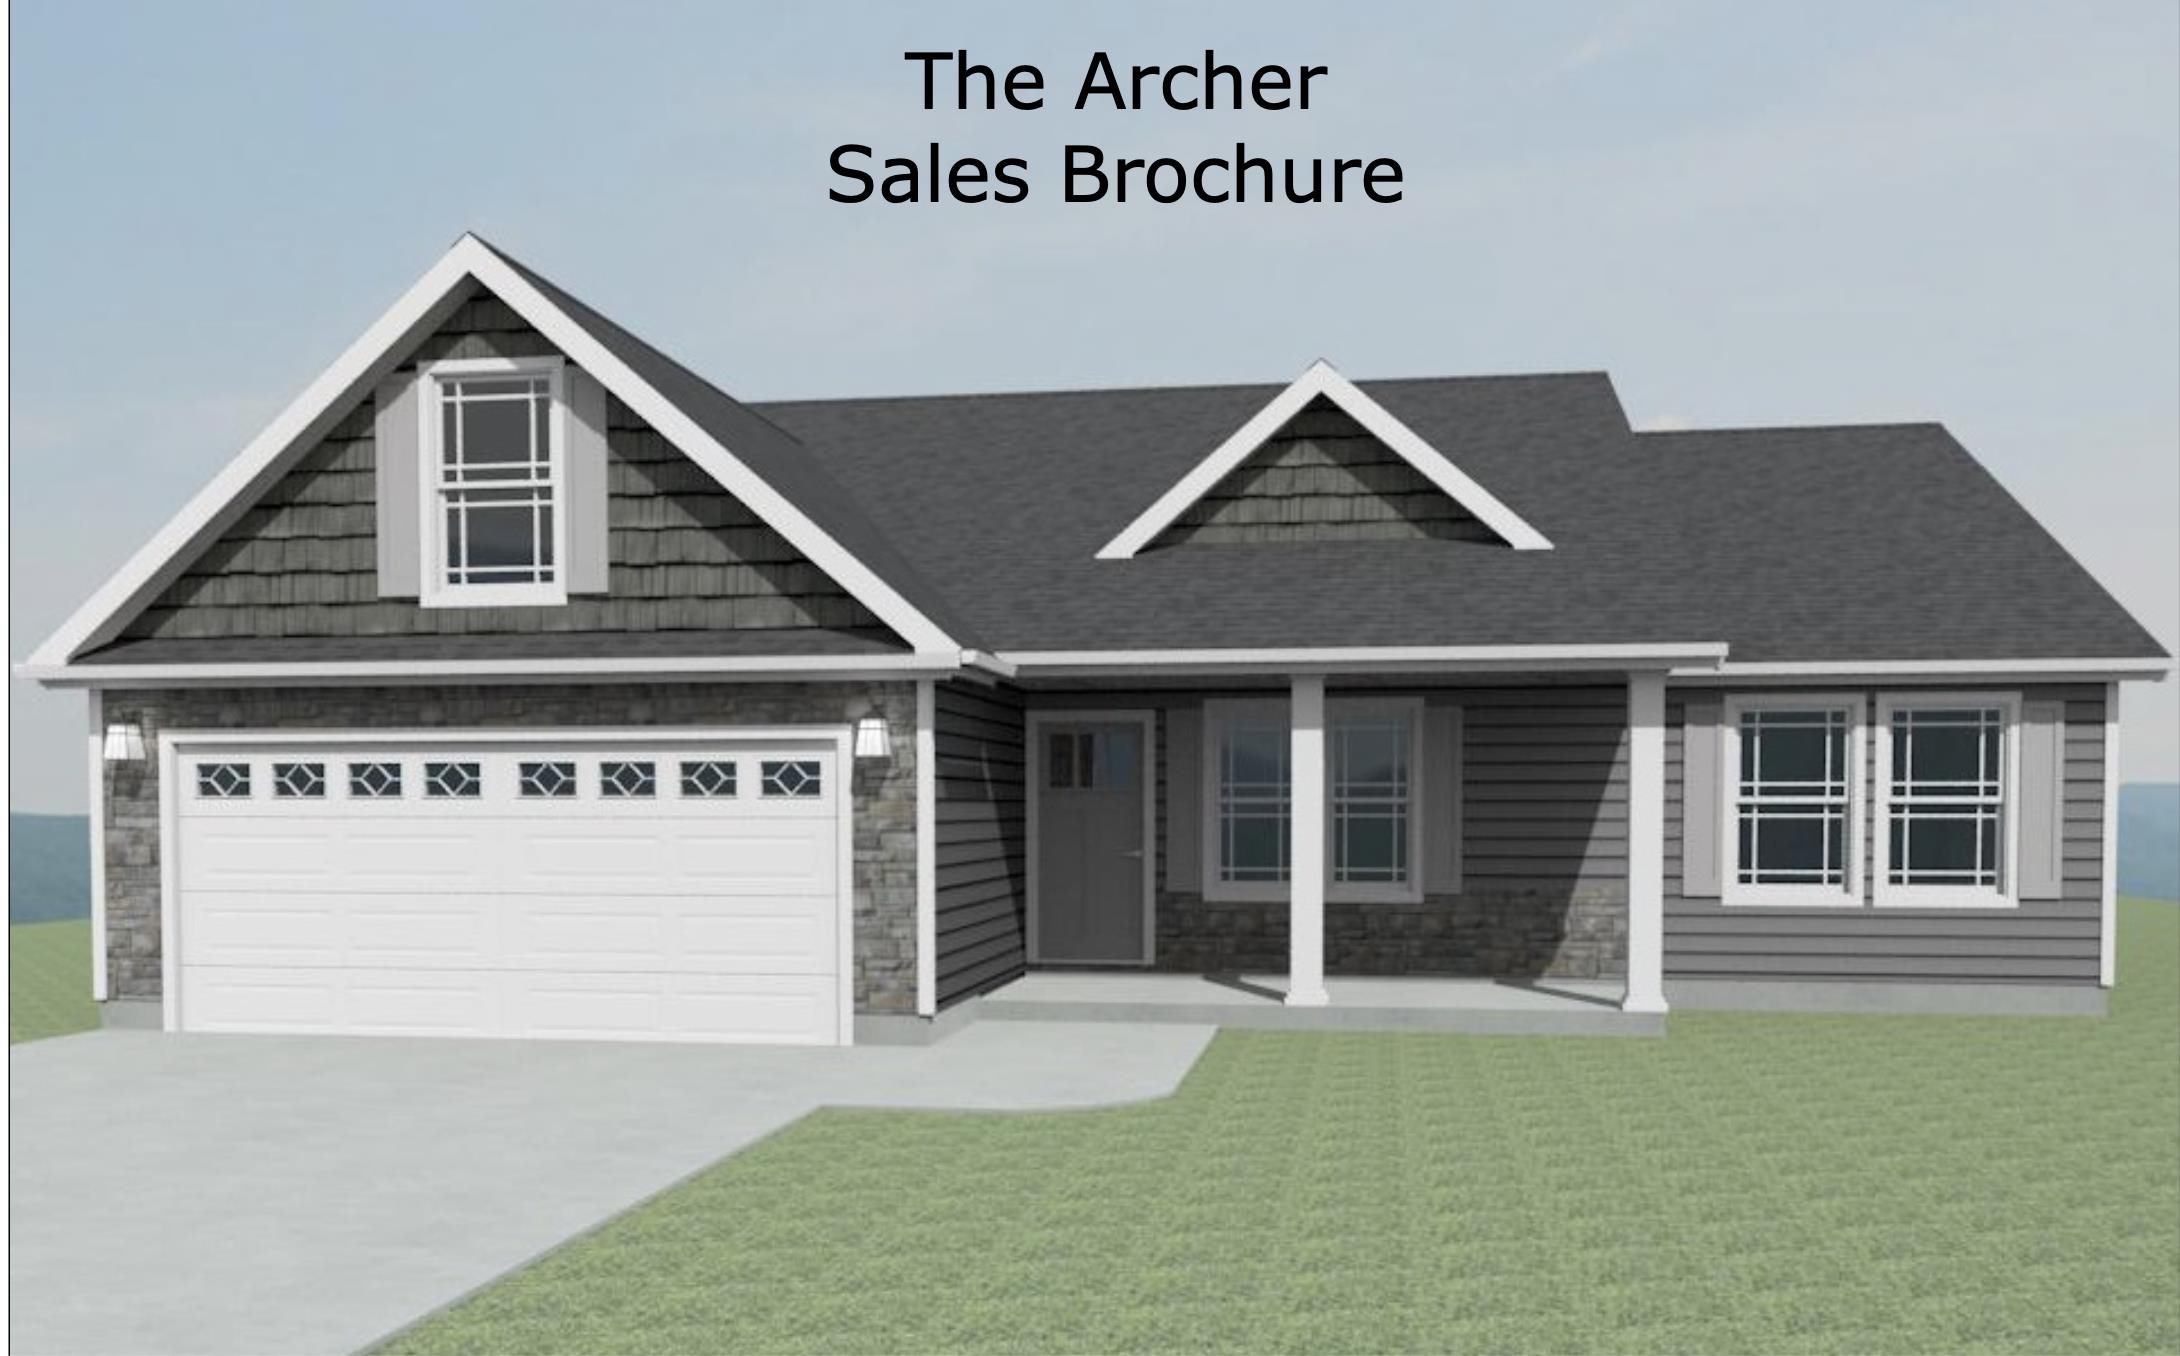 The Archer plan.  This plan offers a split bedroom, open concept layout with a spacious kitchen/dining that opens to a large living room with corner fireplace. Bonus Room above garage. Spacious walk-in master suite with double vanity, walk-in shower and separate tub! Complete with the builder's signature chair rail, crown molding and rope lighting! 12'x12' Covered Patio overlooking a .50 acre lot. Lot 23.